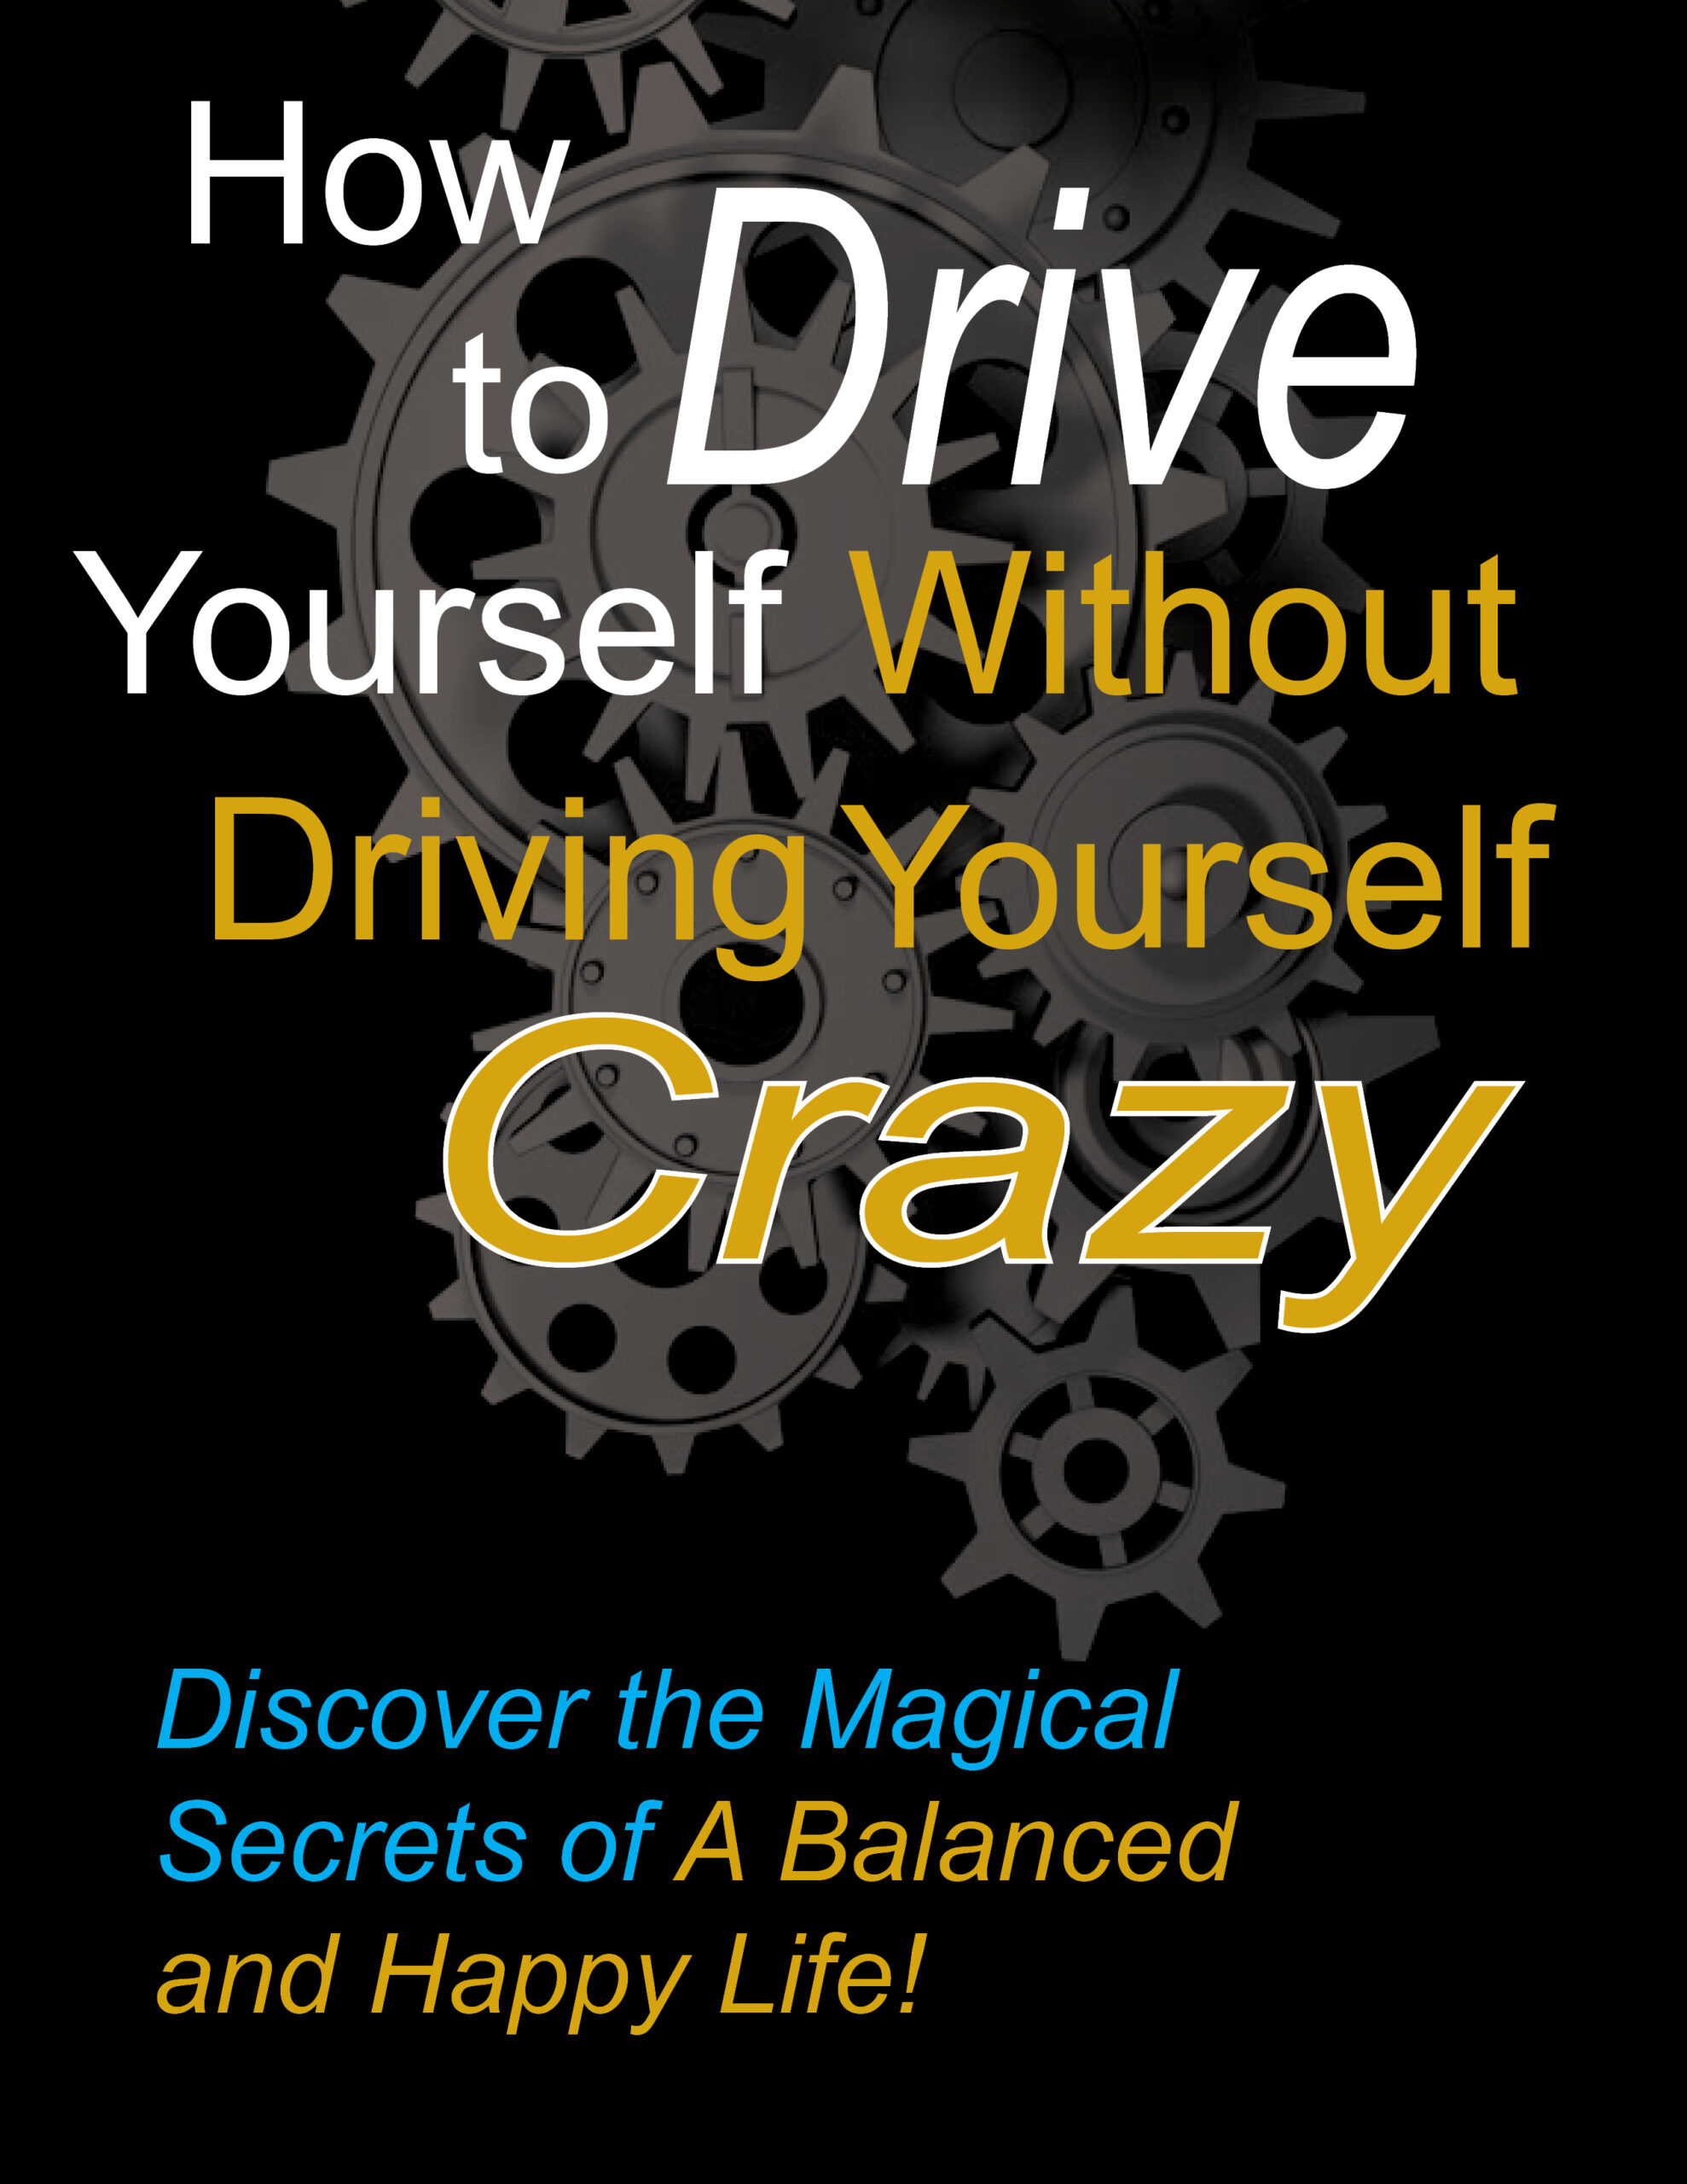 HOW TO DRIVE YOURSELF WITHOUT DRIVING YOURSELF CRAZY!